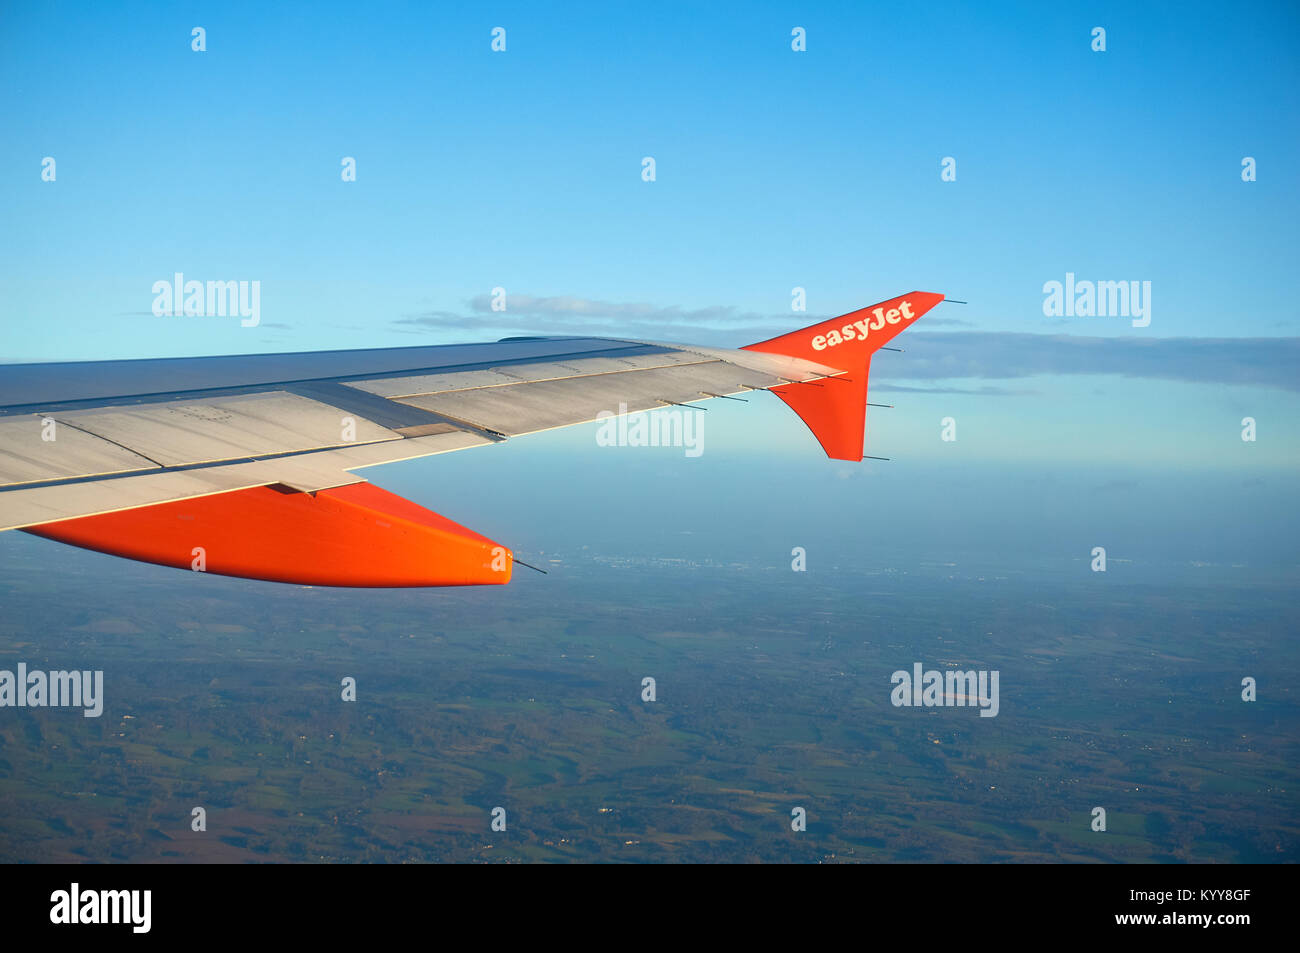 An Easyjet aircraft wing in flight seen from the cabin. Stock Photo